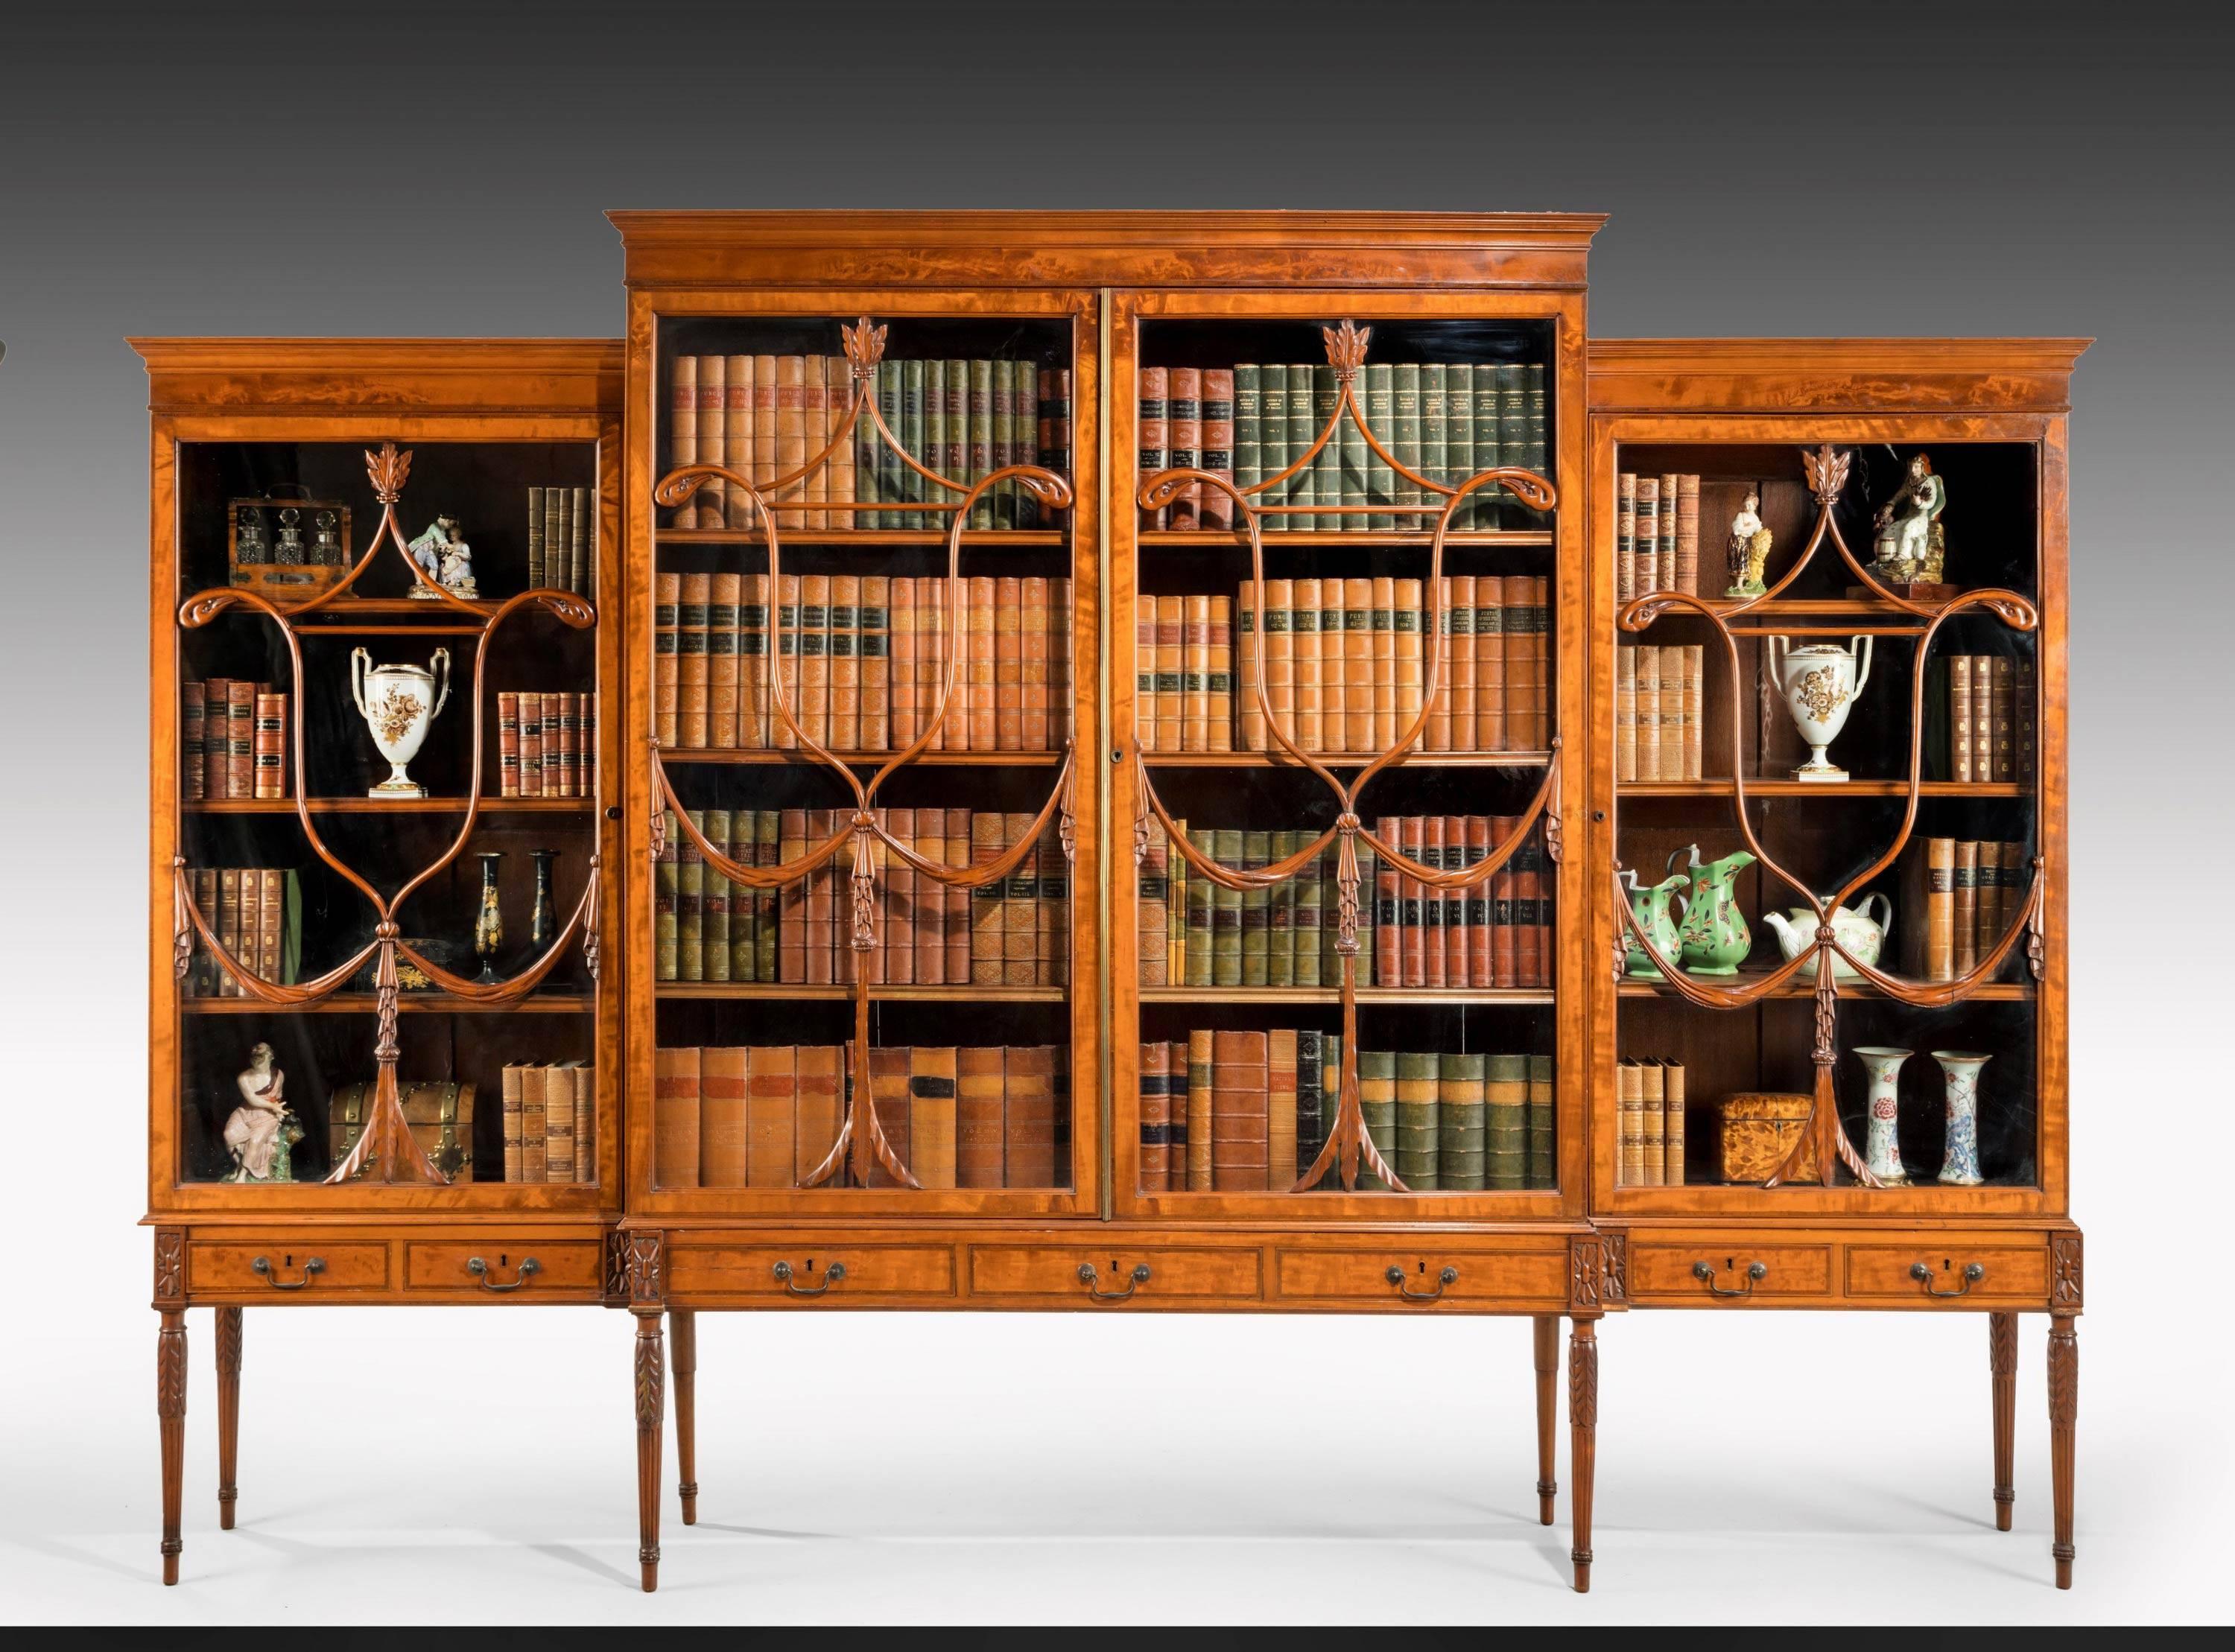 An unusual George III period mahogany breakfront bookcase. The top beautifully drawn with elaborate and finely carved astragals. Retaining the original Georgian glass. The base rebuilt in a rather more delicate way than would have been in the